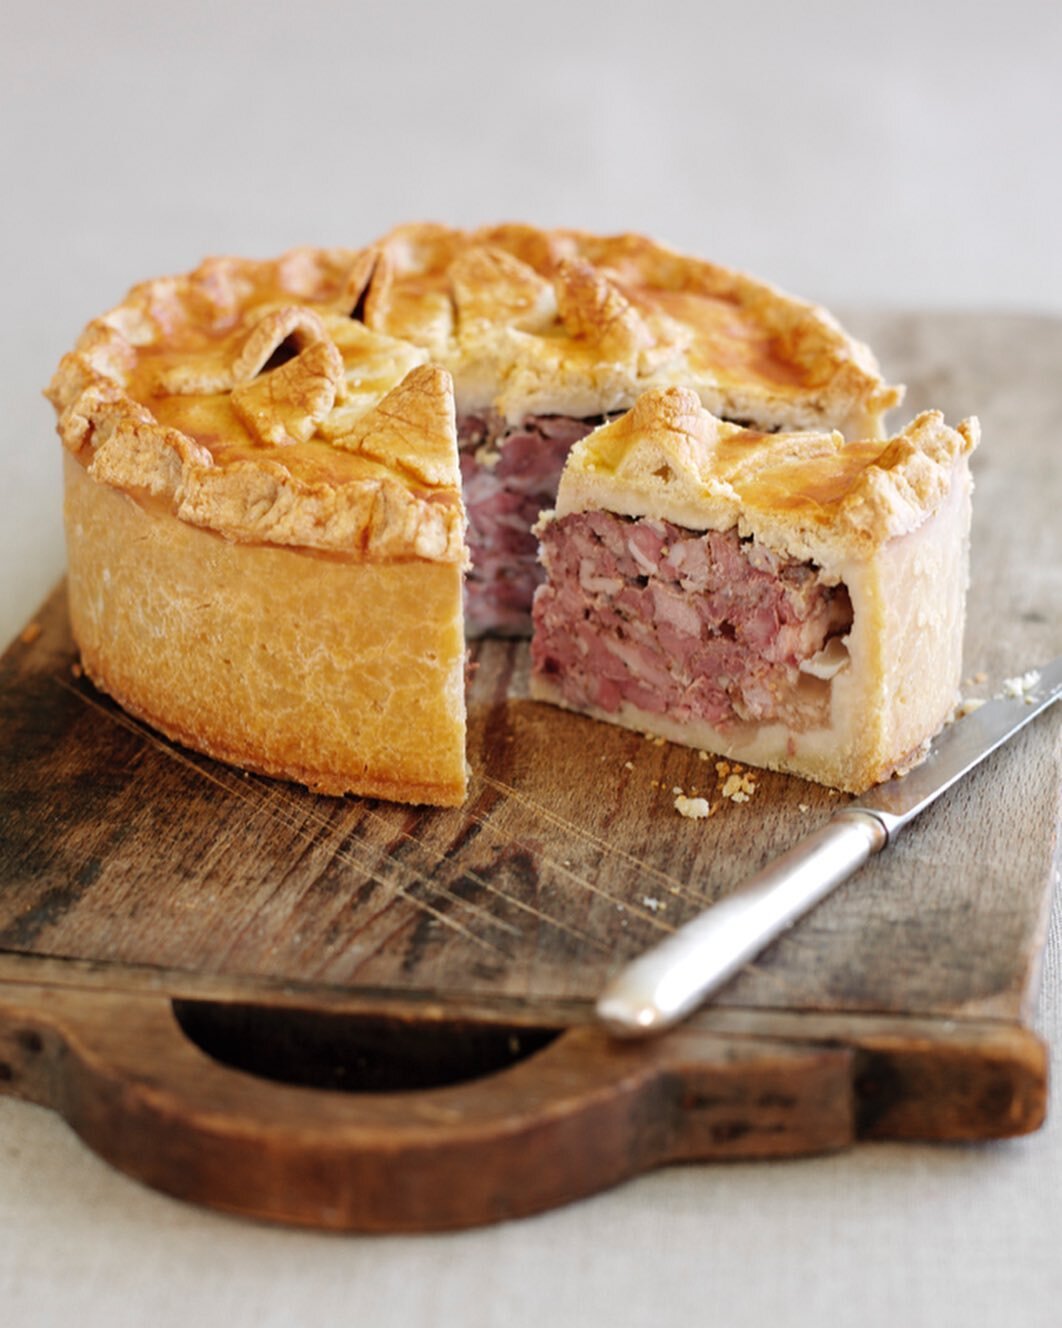 How about making a pork pie for the weekend to round off National Pie Week?!

Raised pies are so much easier than they might appear IMHO - the hot water crust pastry being 10 times easier to make, and handle, than shortcrust pastry for a pie or tart 